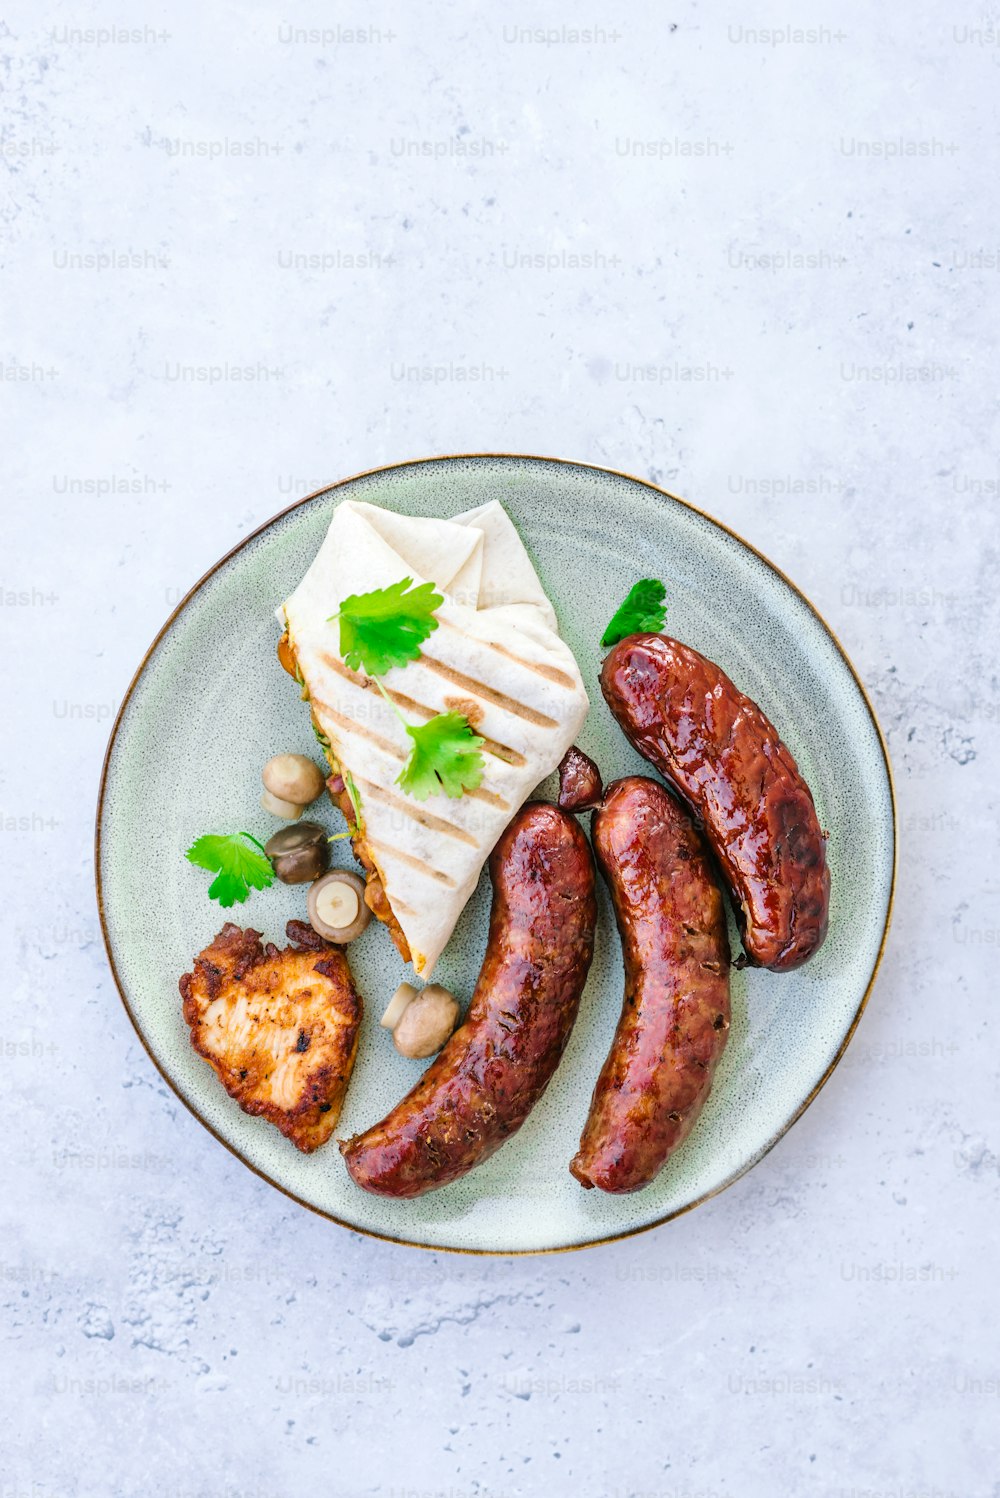 a plate with sausages, bread, and other foods on it